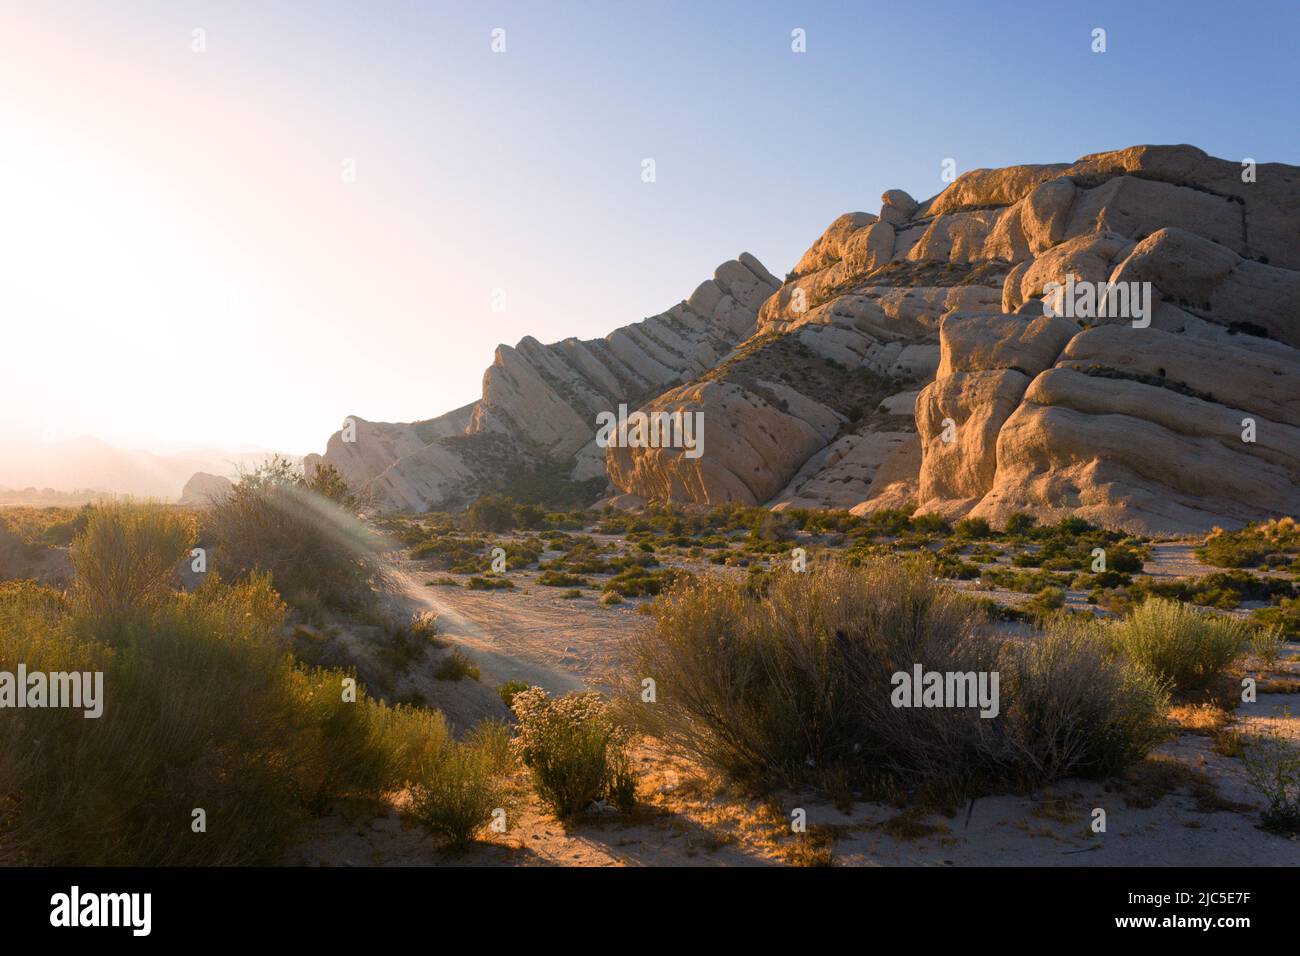 The Mormon Rocks, located along the San Andreas Fault, are part of the San Gabriel Mountains in Phelan, California USA Stock Photo